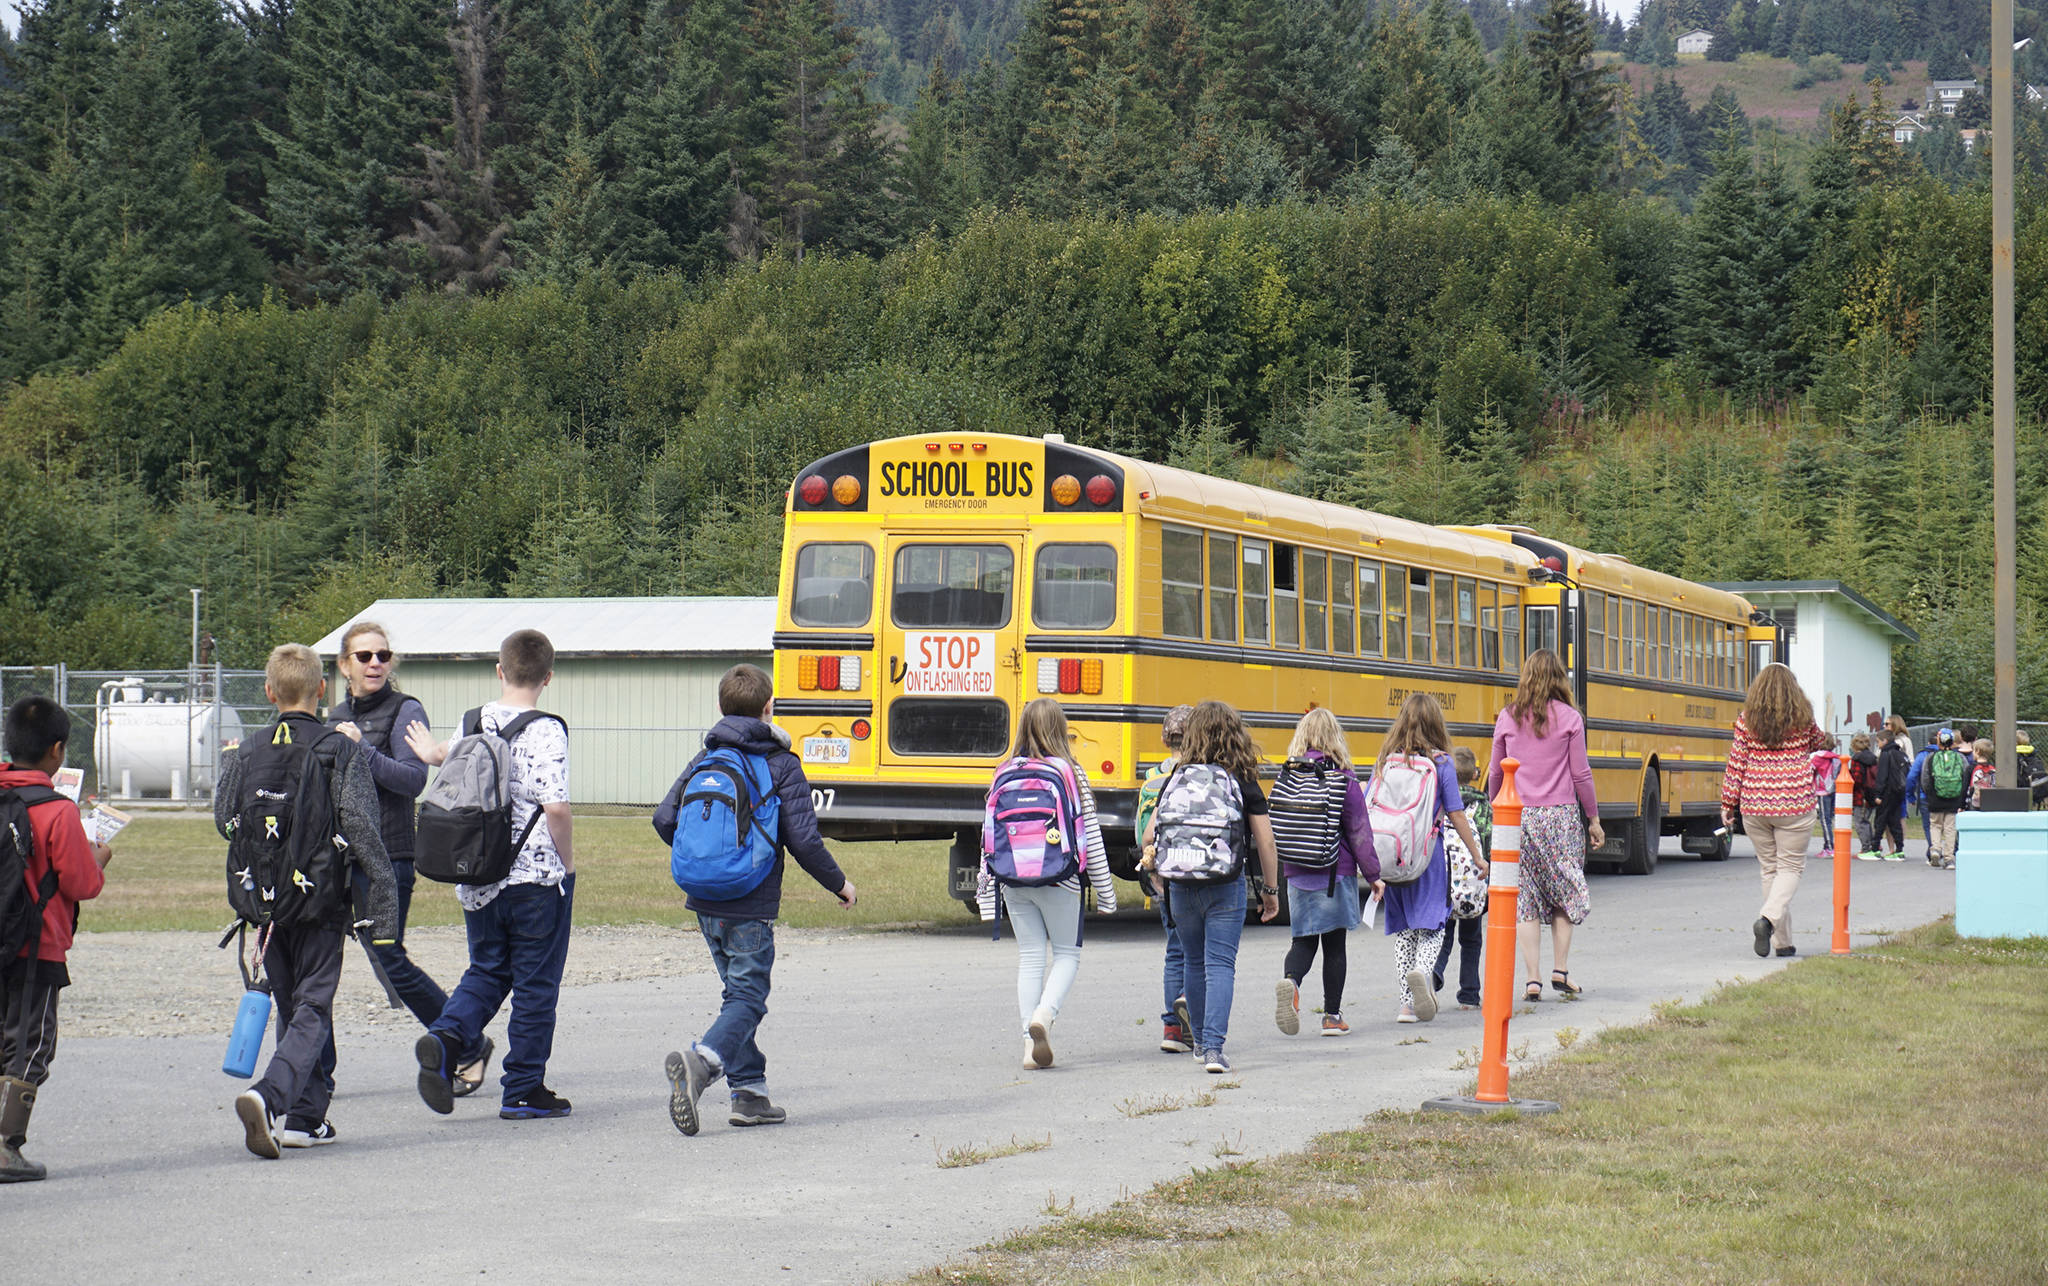 Fireweed Academy and West Homer Elementary School students and teachers walk to school buses on the first day of school on Tuesday, Aug. 20, 2019, in Homer, Alaska. A new traffic system has children lining up and boarding buses at the back of the school by the multipurpose room. (Photo by Michael Armstrong/Homer News)